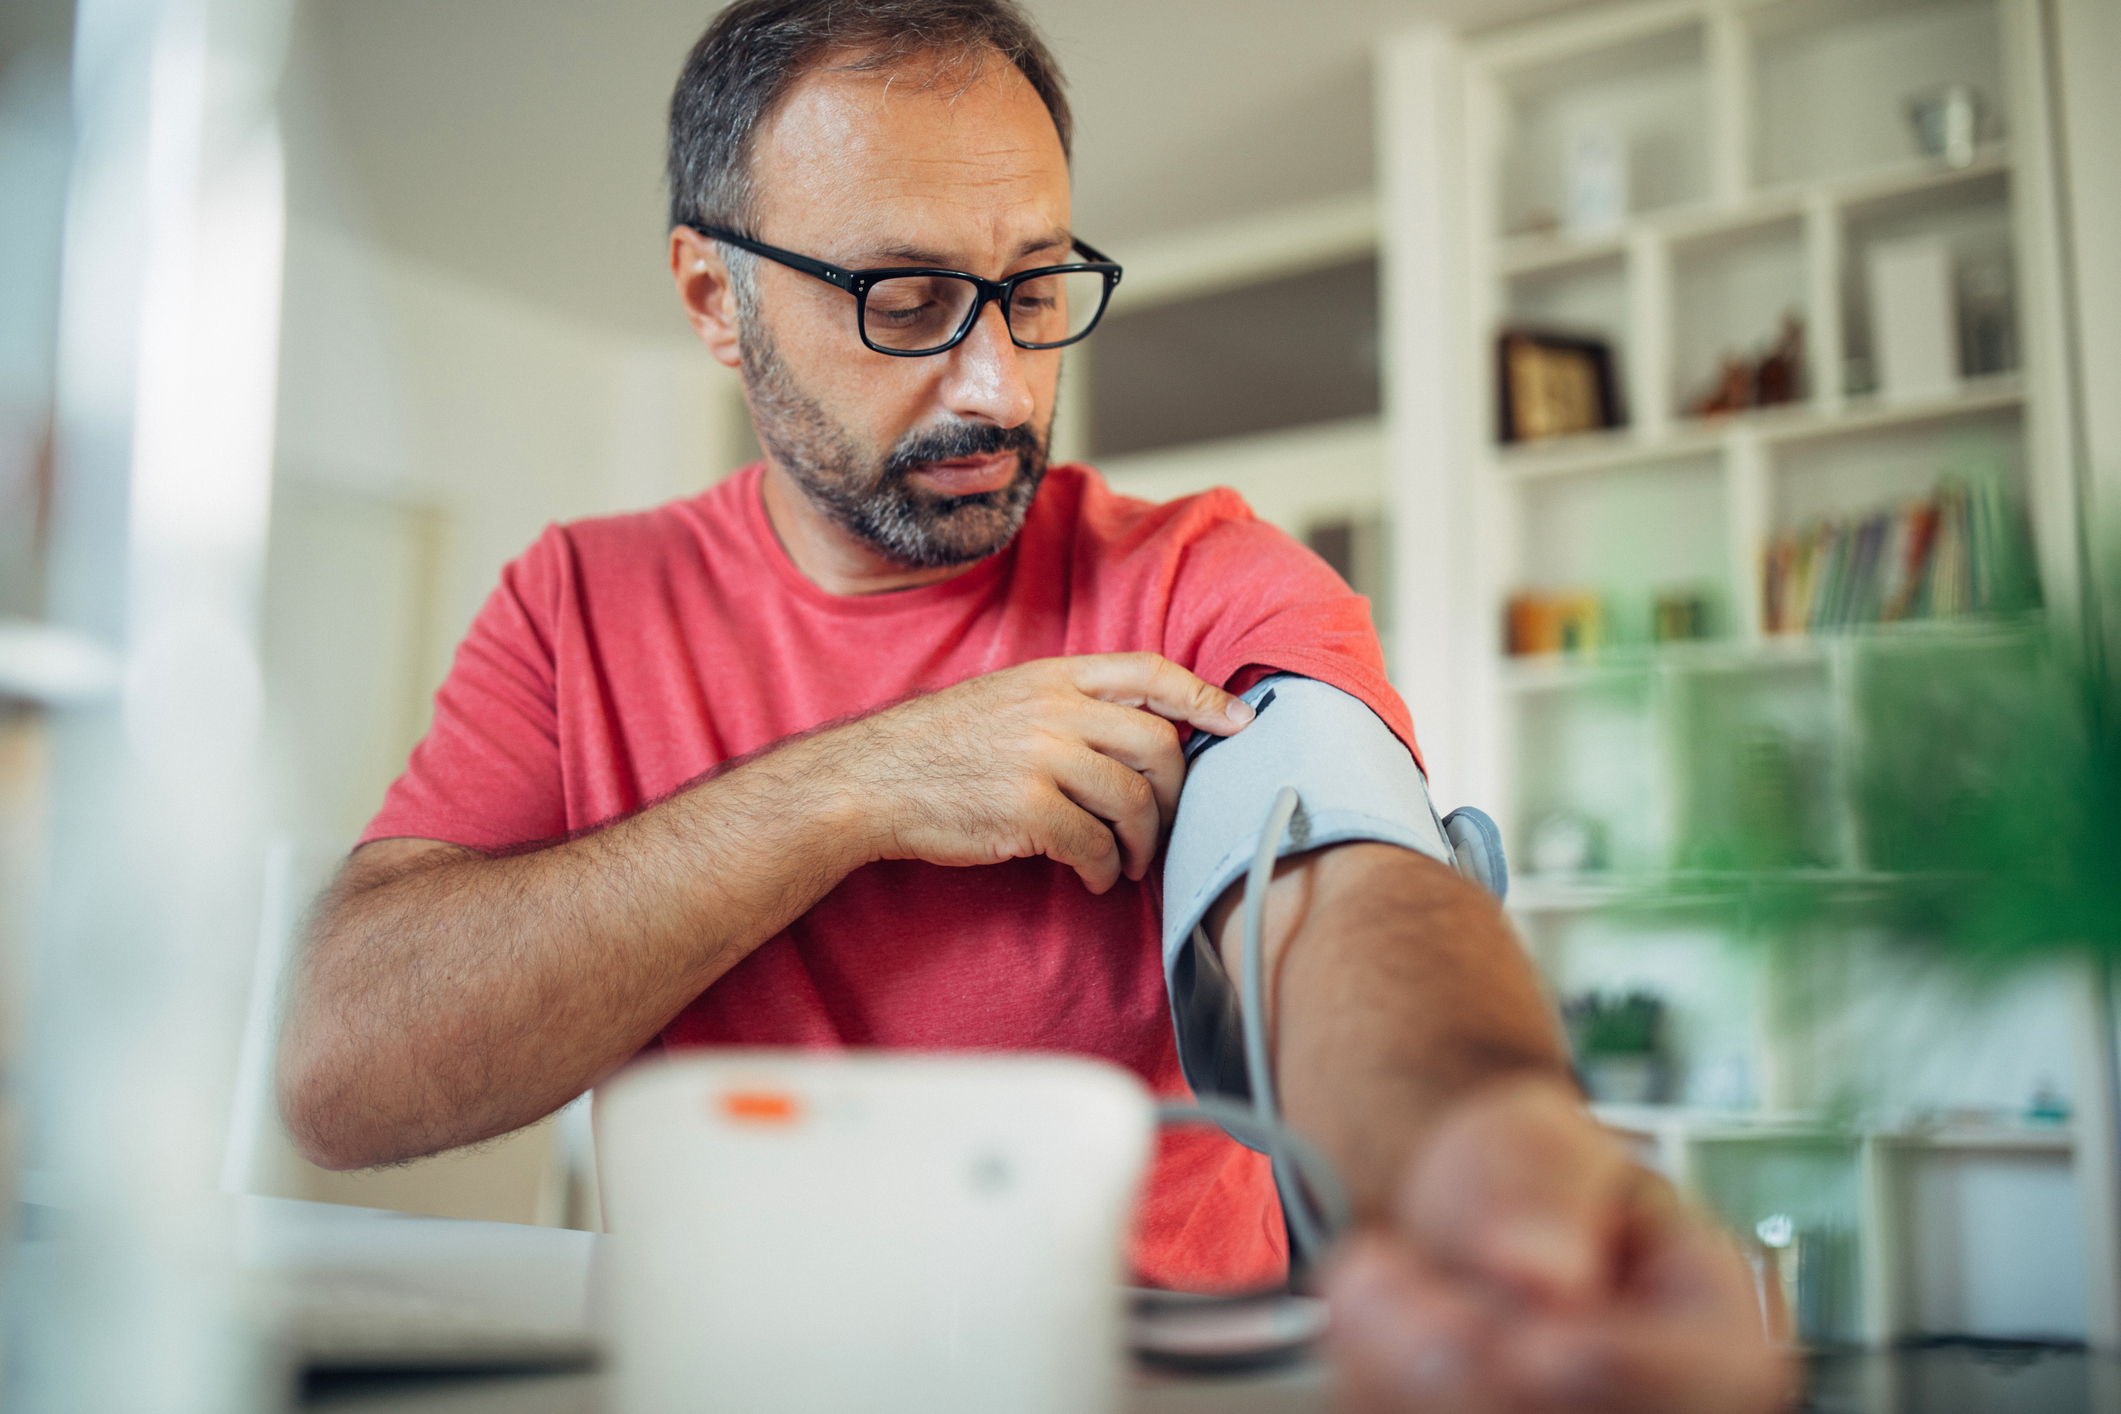 Tips for monitoring your blood pressure at home